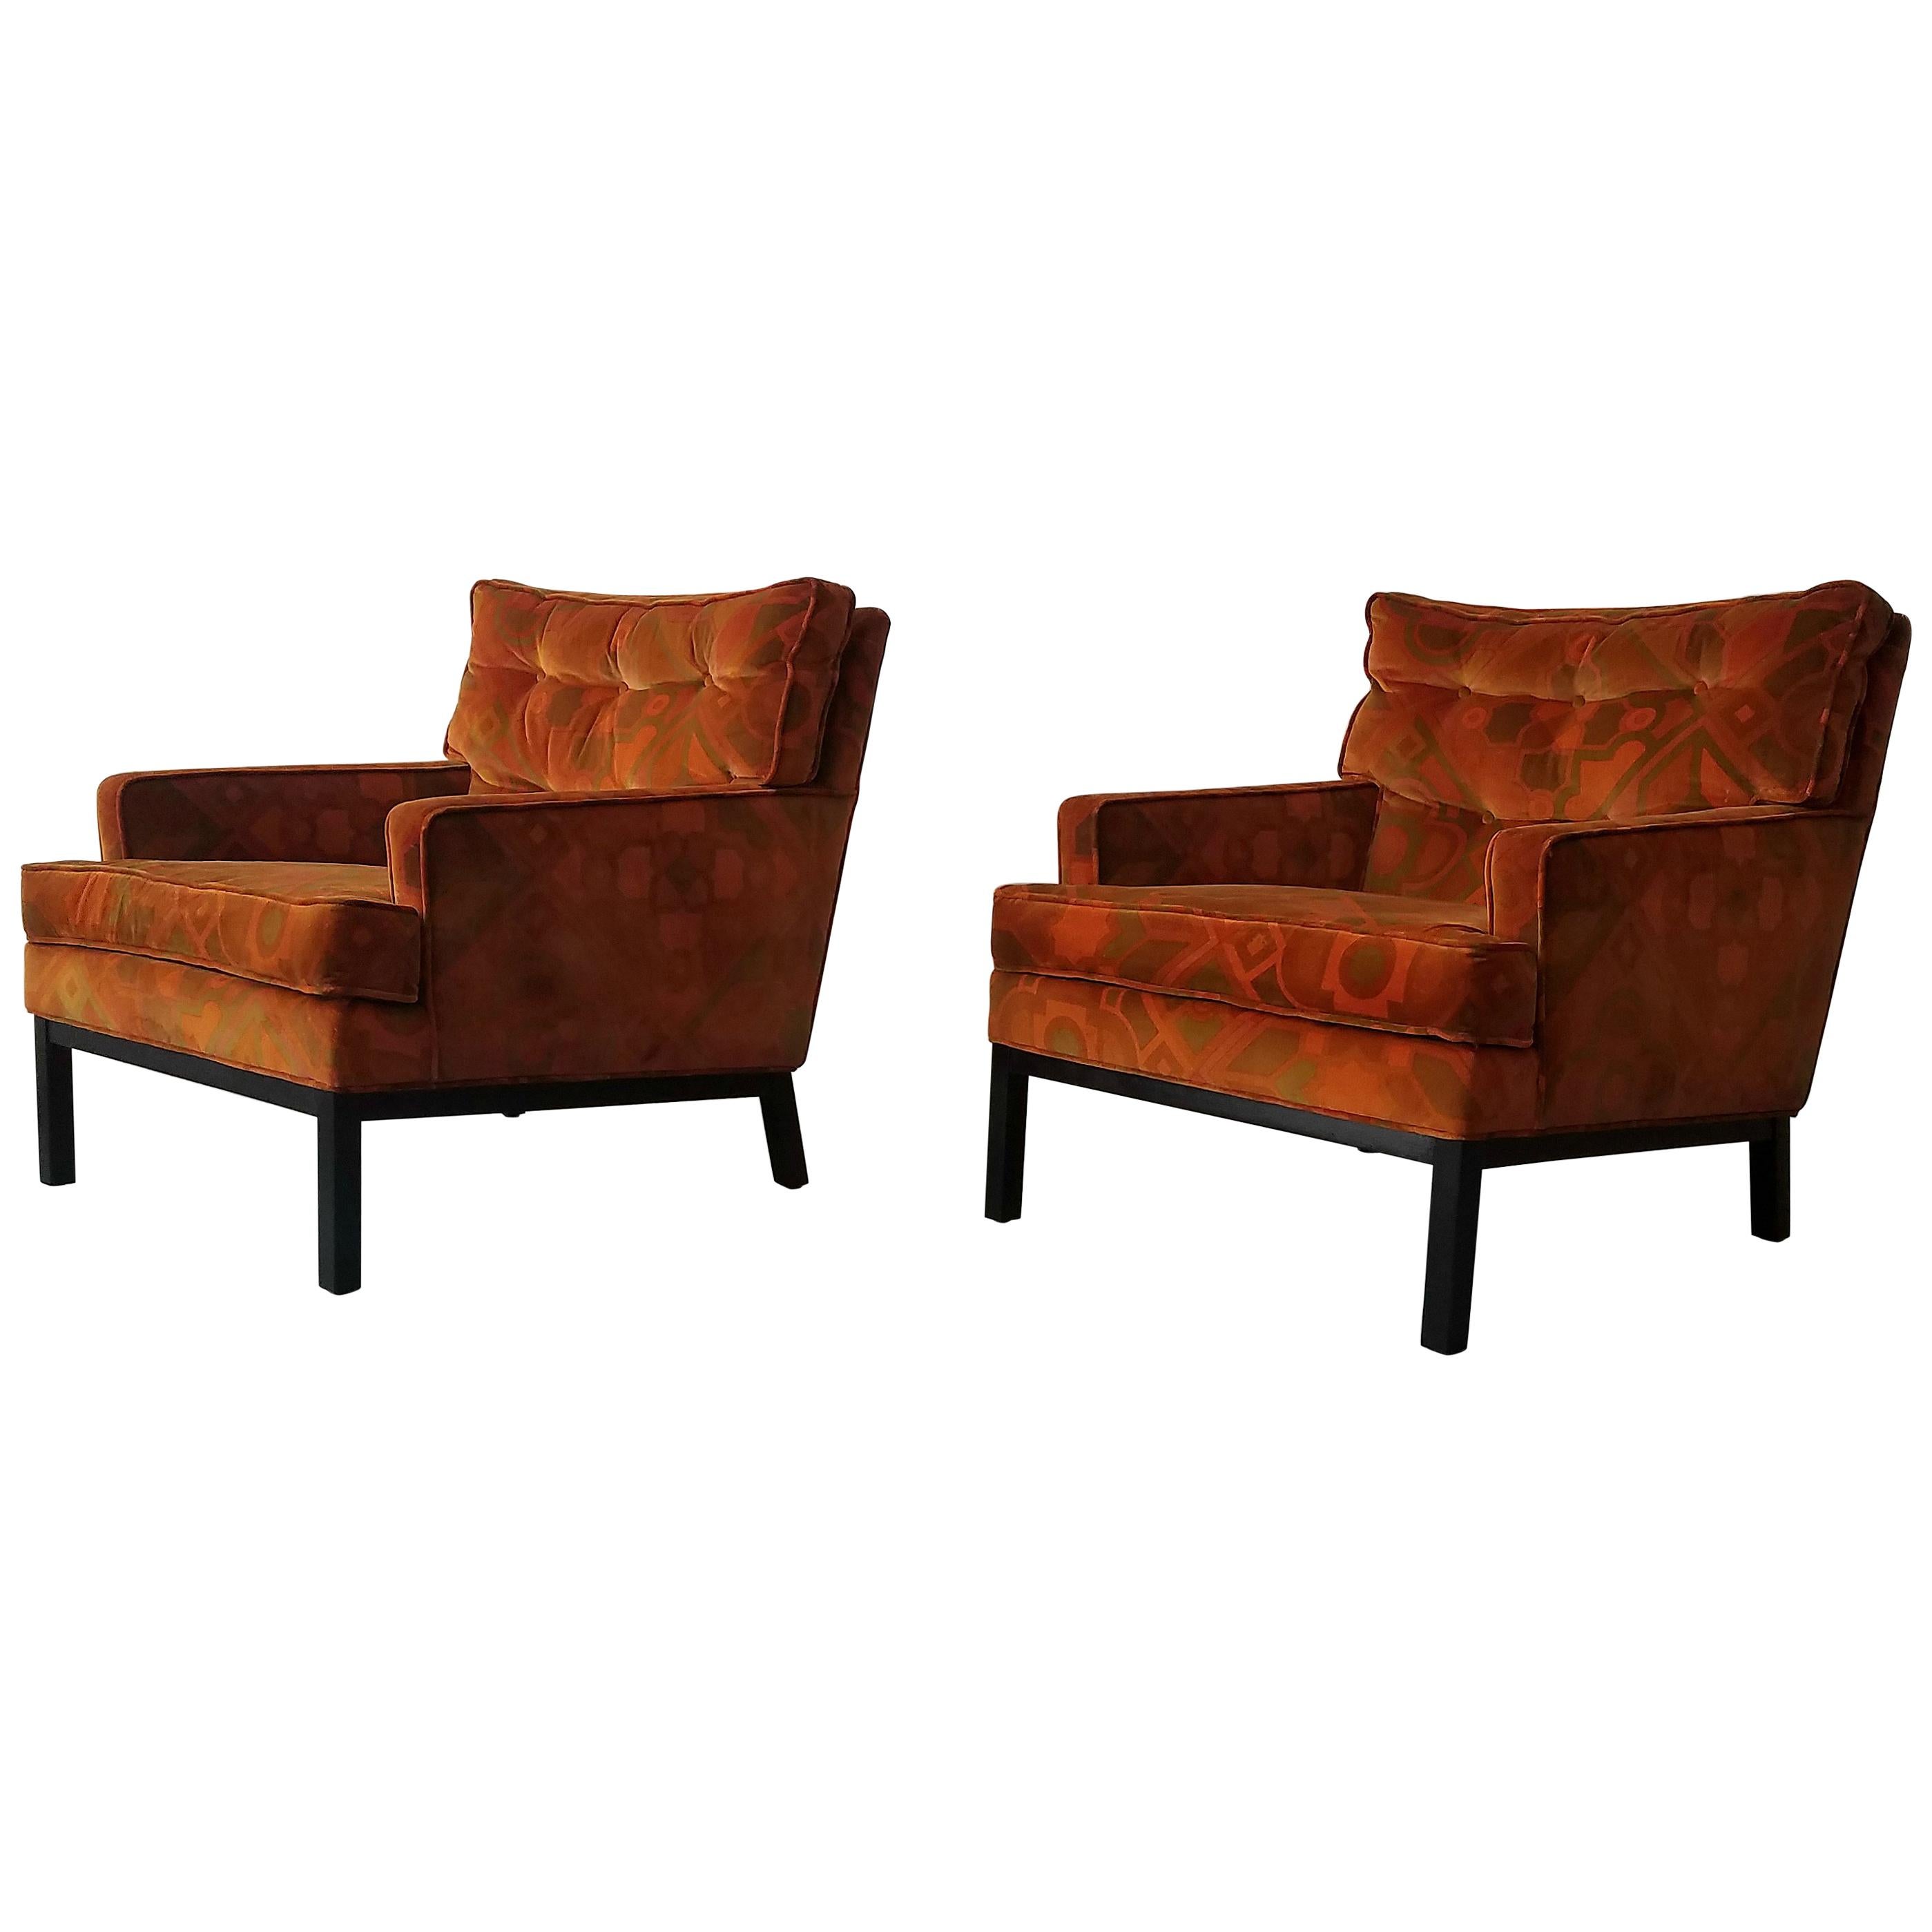 Pair of Midcentury Lounge Chairs by Harvey Probber in Jack Lenor Larsen Fabric